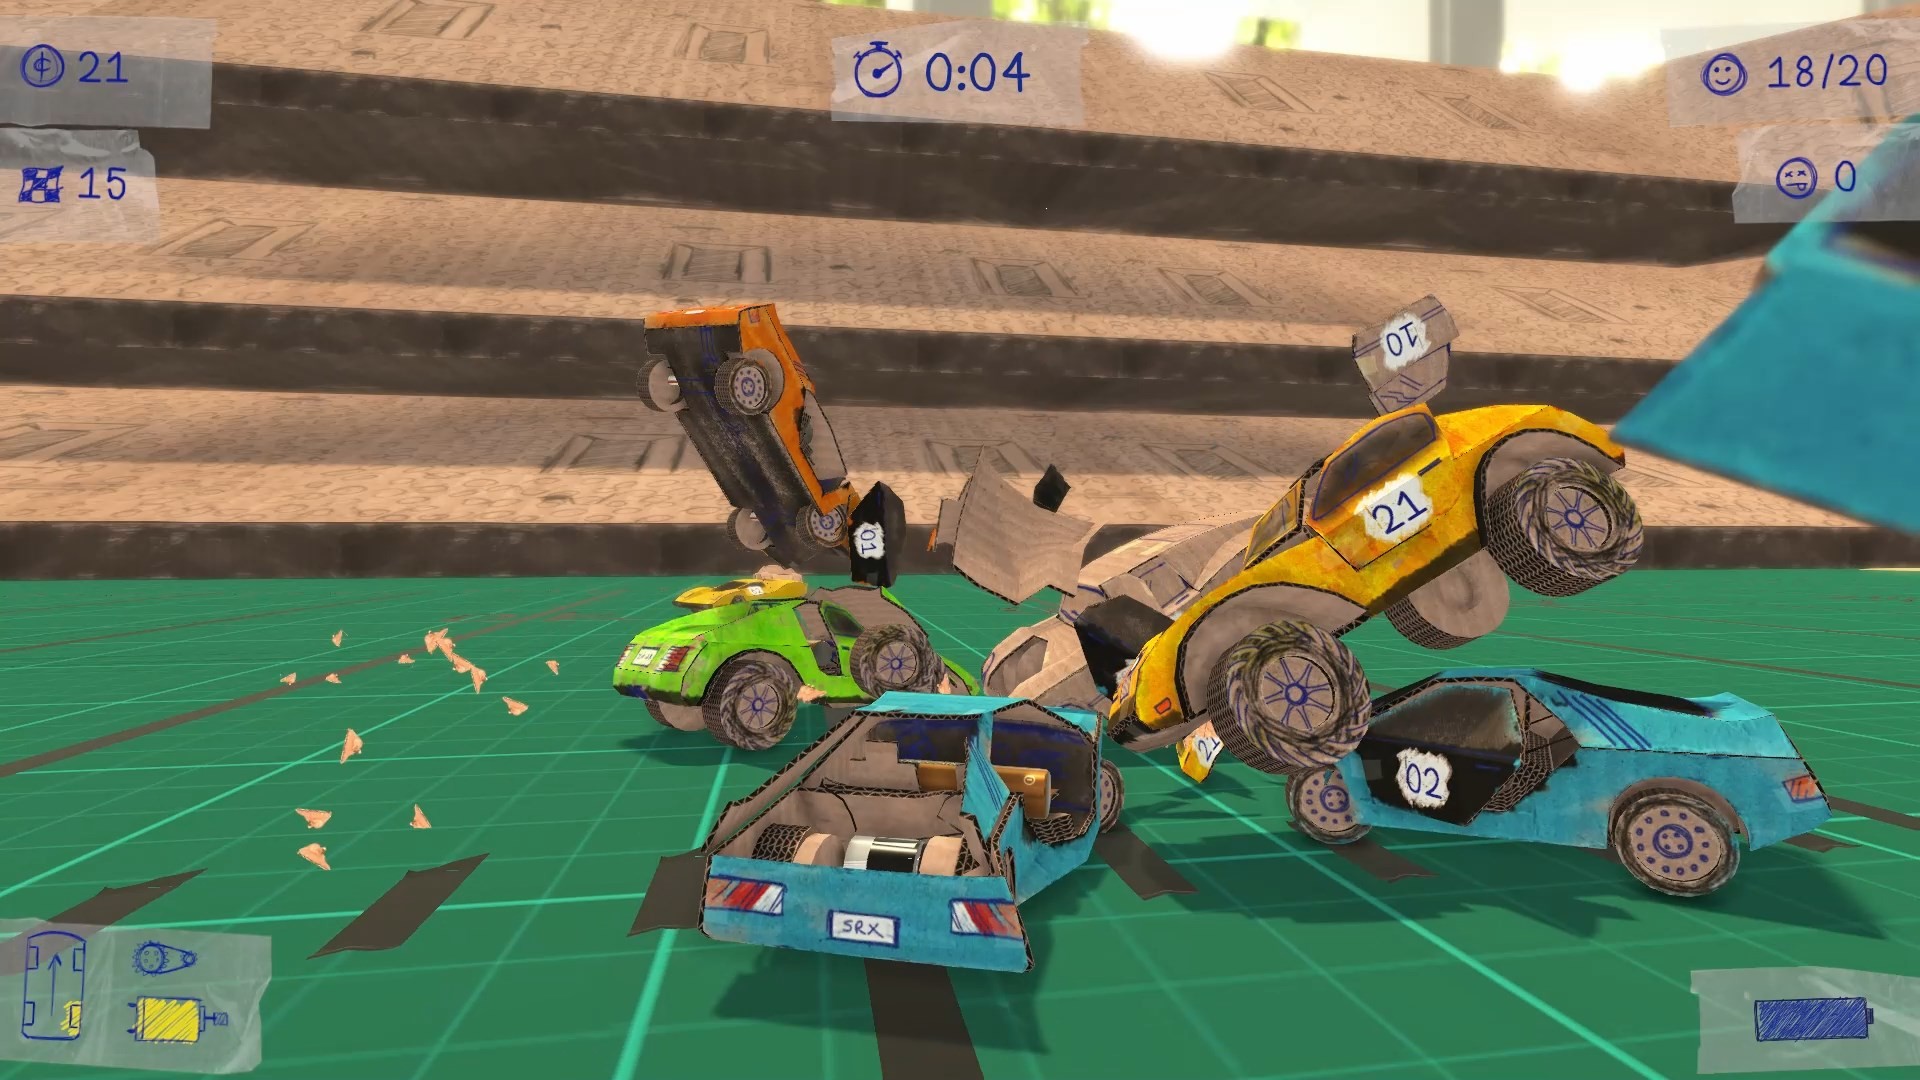 Get Ready For Some Brutal Destruction And Car Combat In Concept Destruction, Set To Release On May 22 For Both PC And Console Audiences